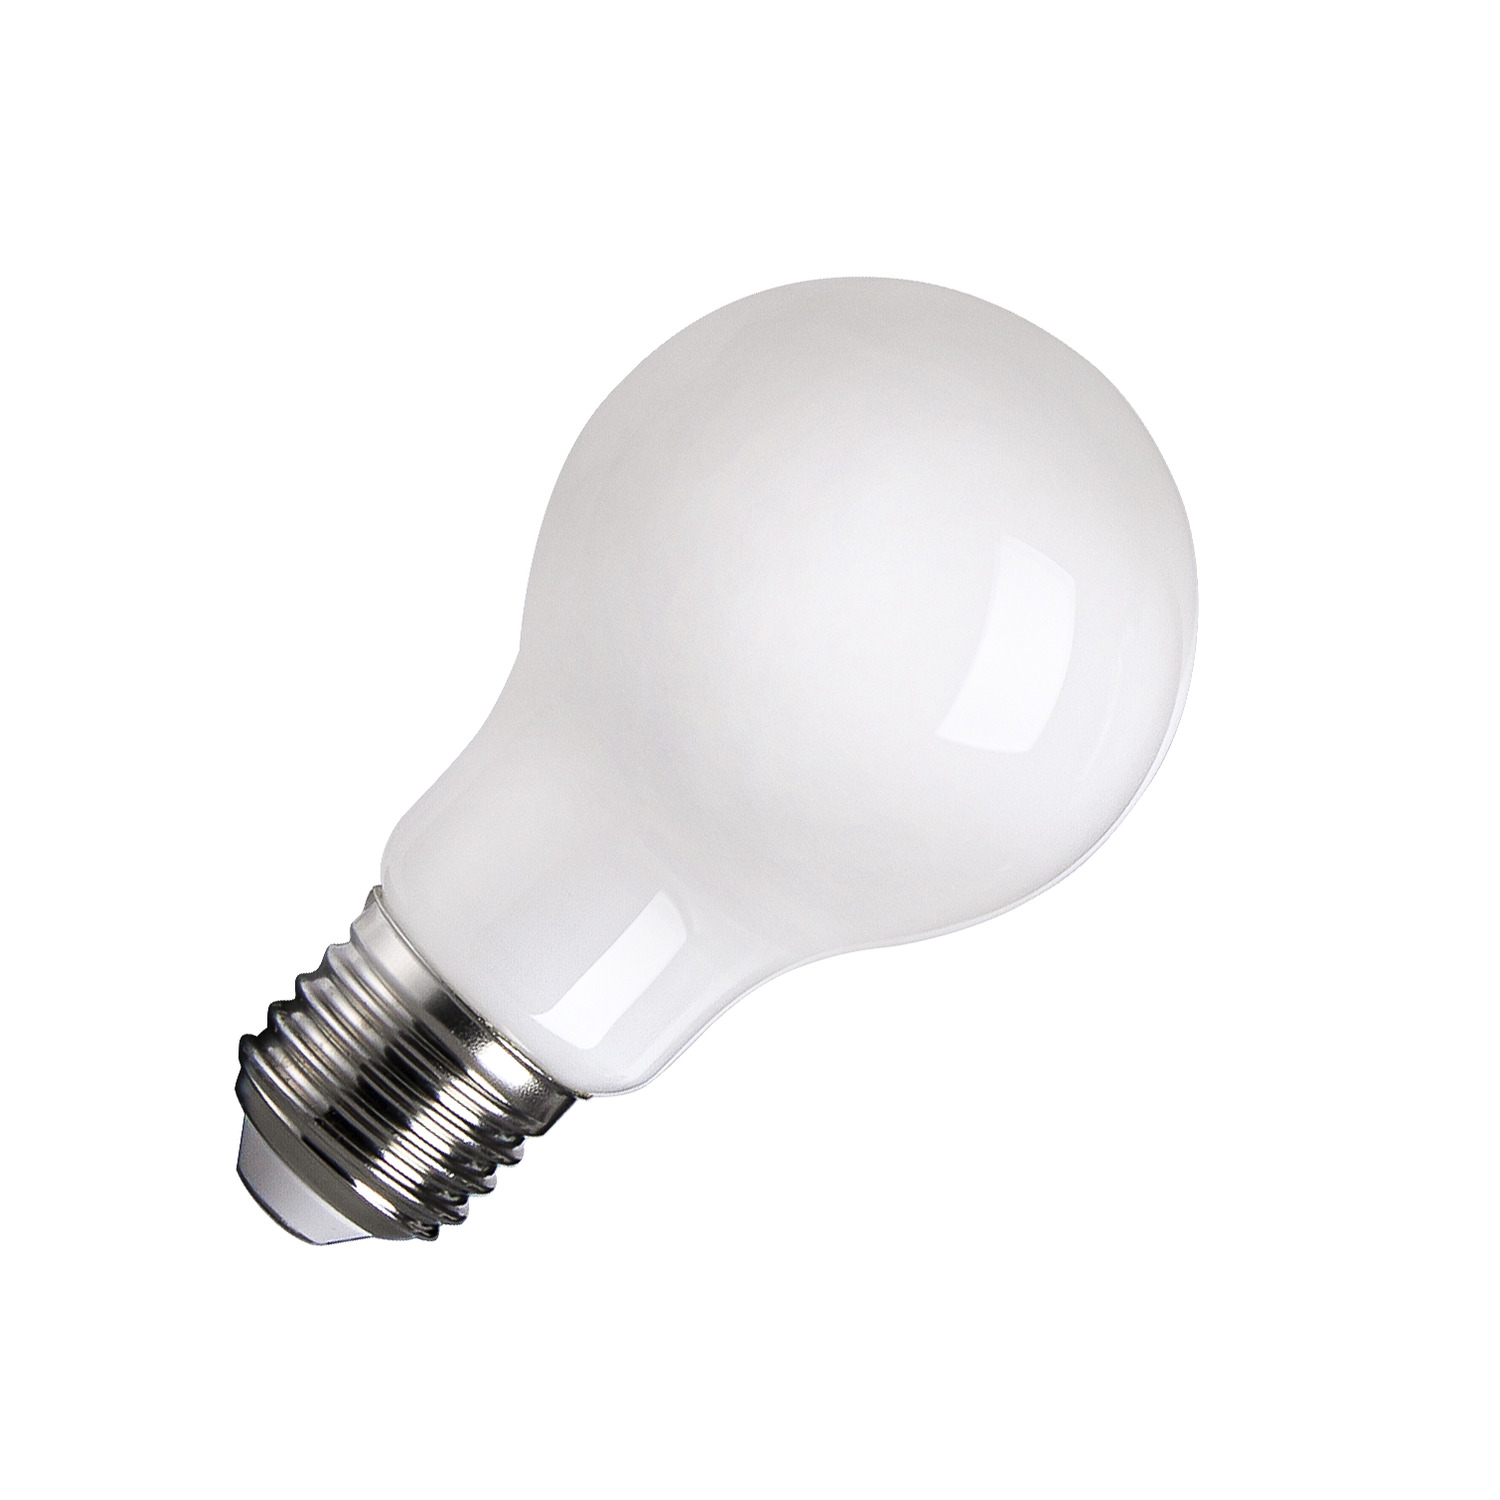 A60 E27 led frosted 7,5W 2700K CRI90 320°